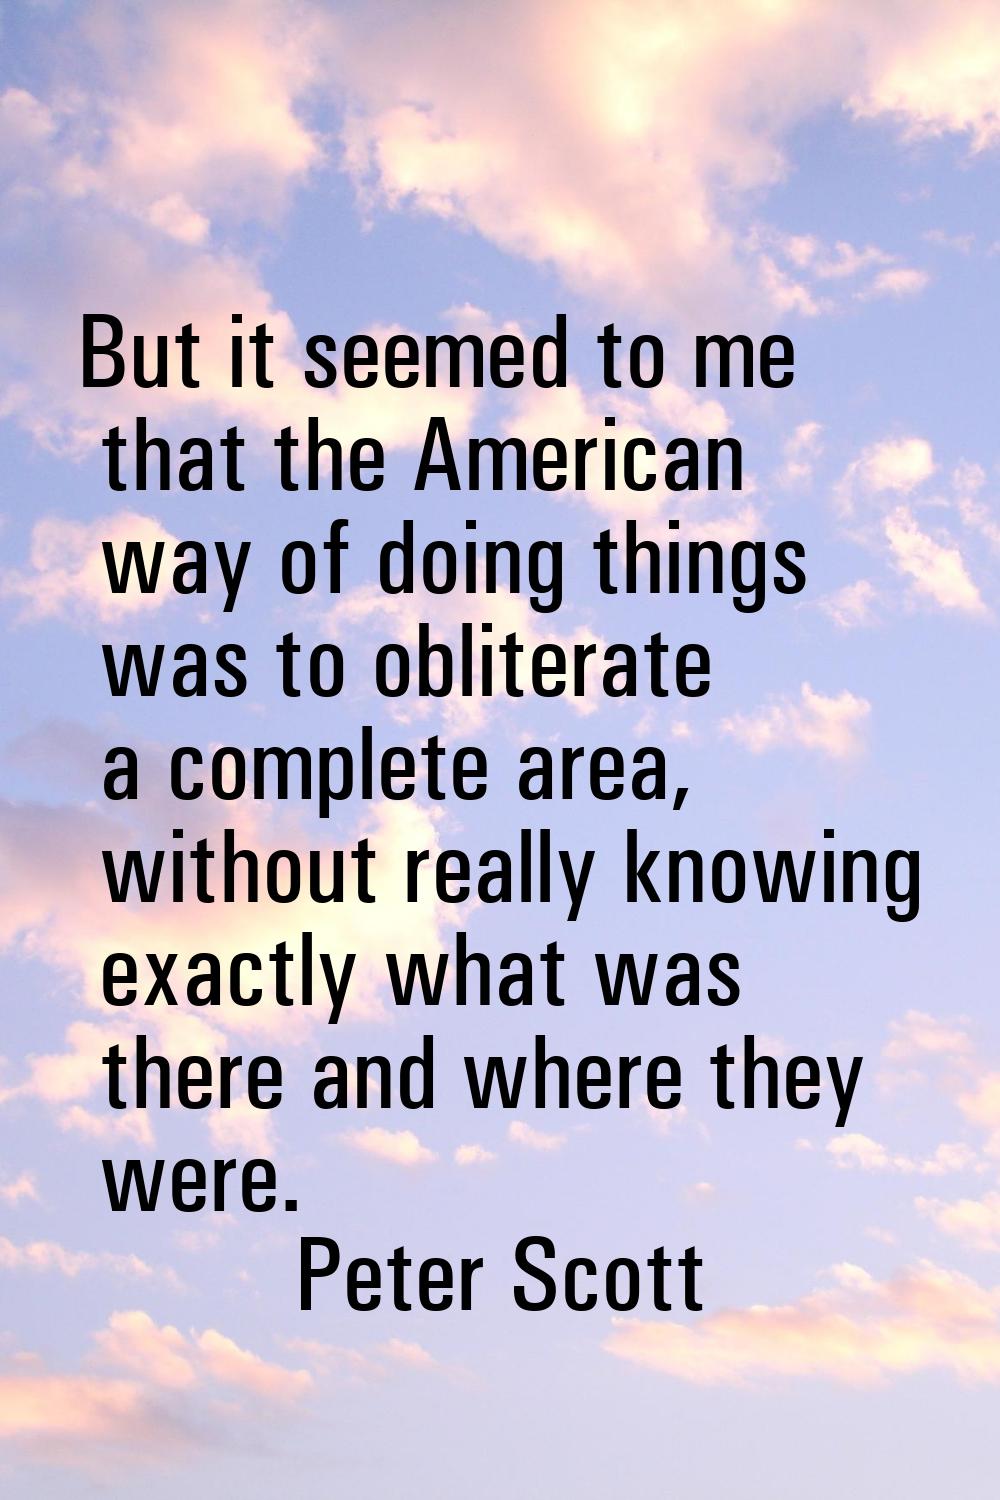 But it seemed to me that the American way of doing things was to obliterate a complete area, withou